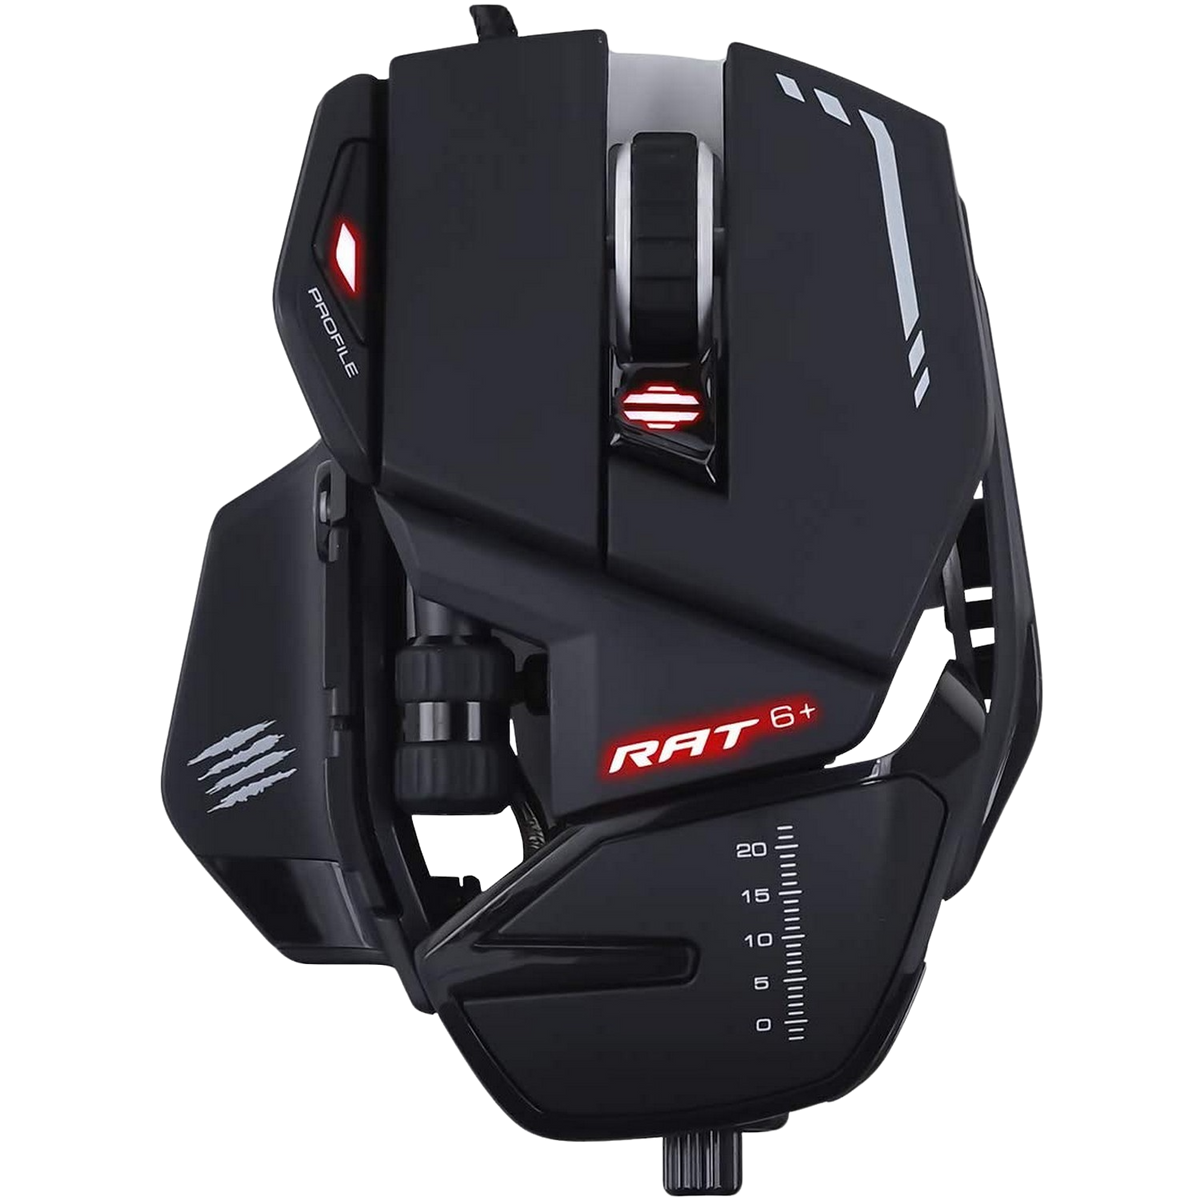 Gaming CATZ MR04DCINBL000-0 Schwarz Maus, MAD MOUSE, OPTICAL R.A.T. GAMING 6+ BL